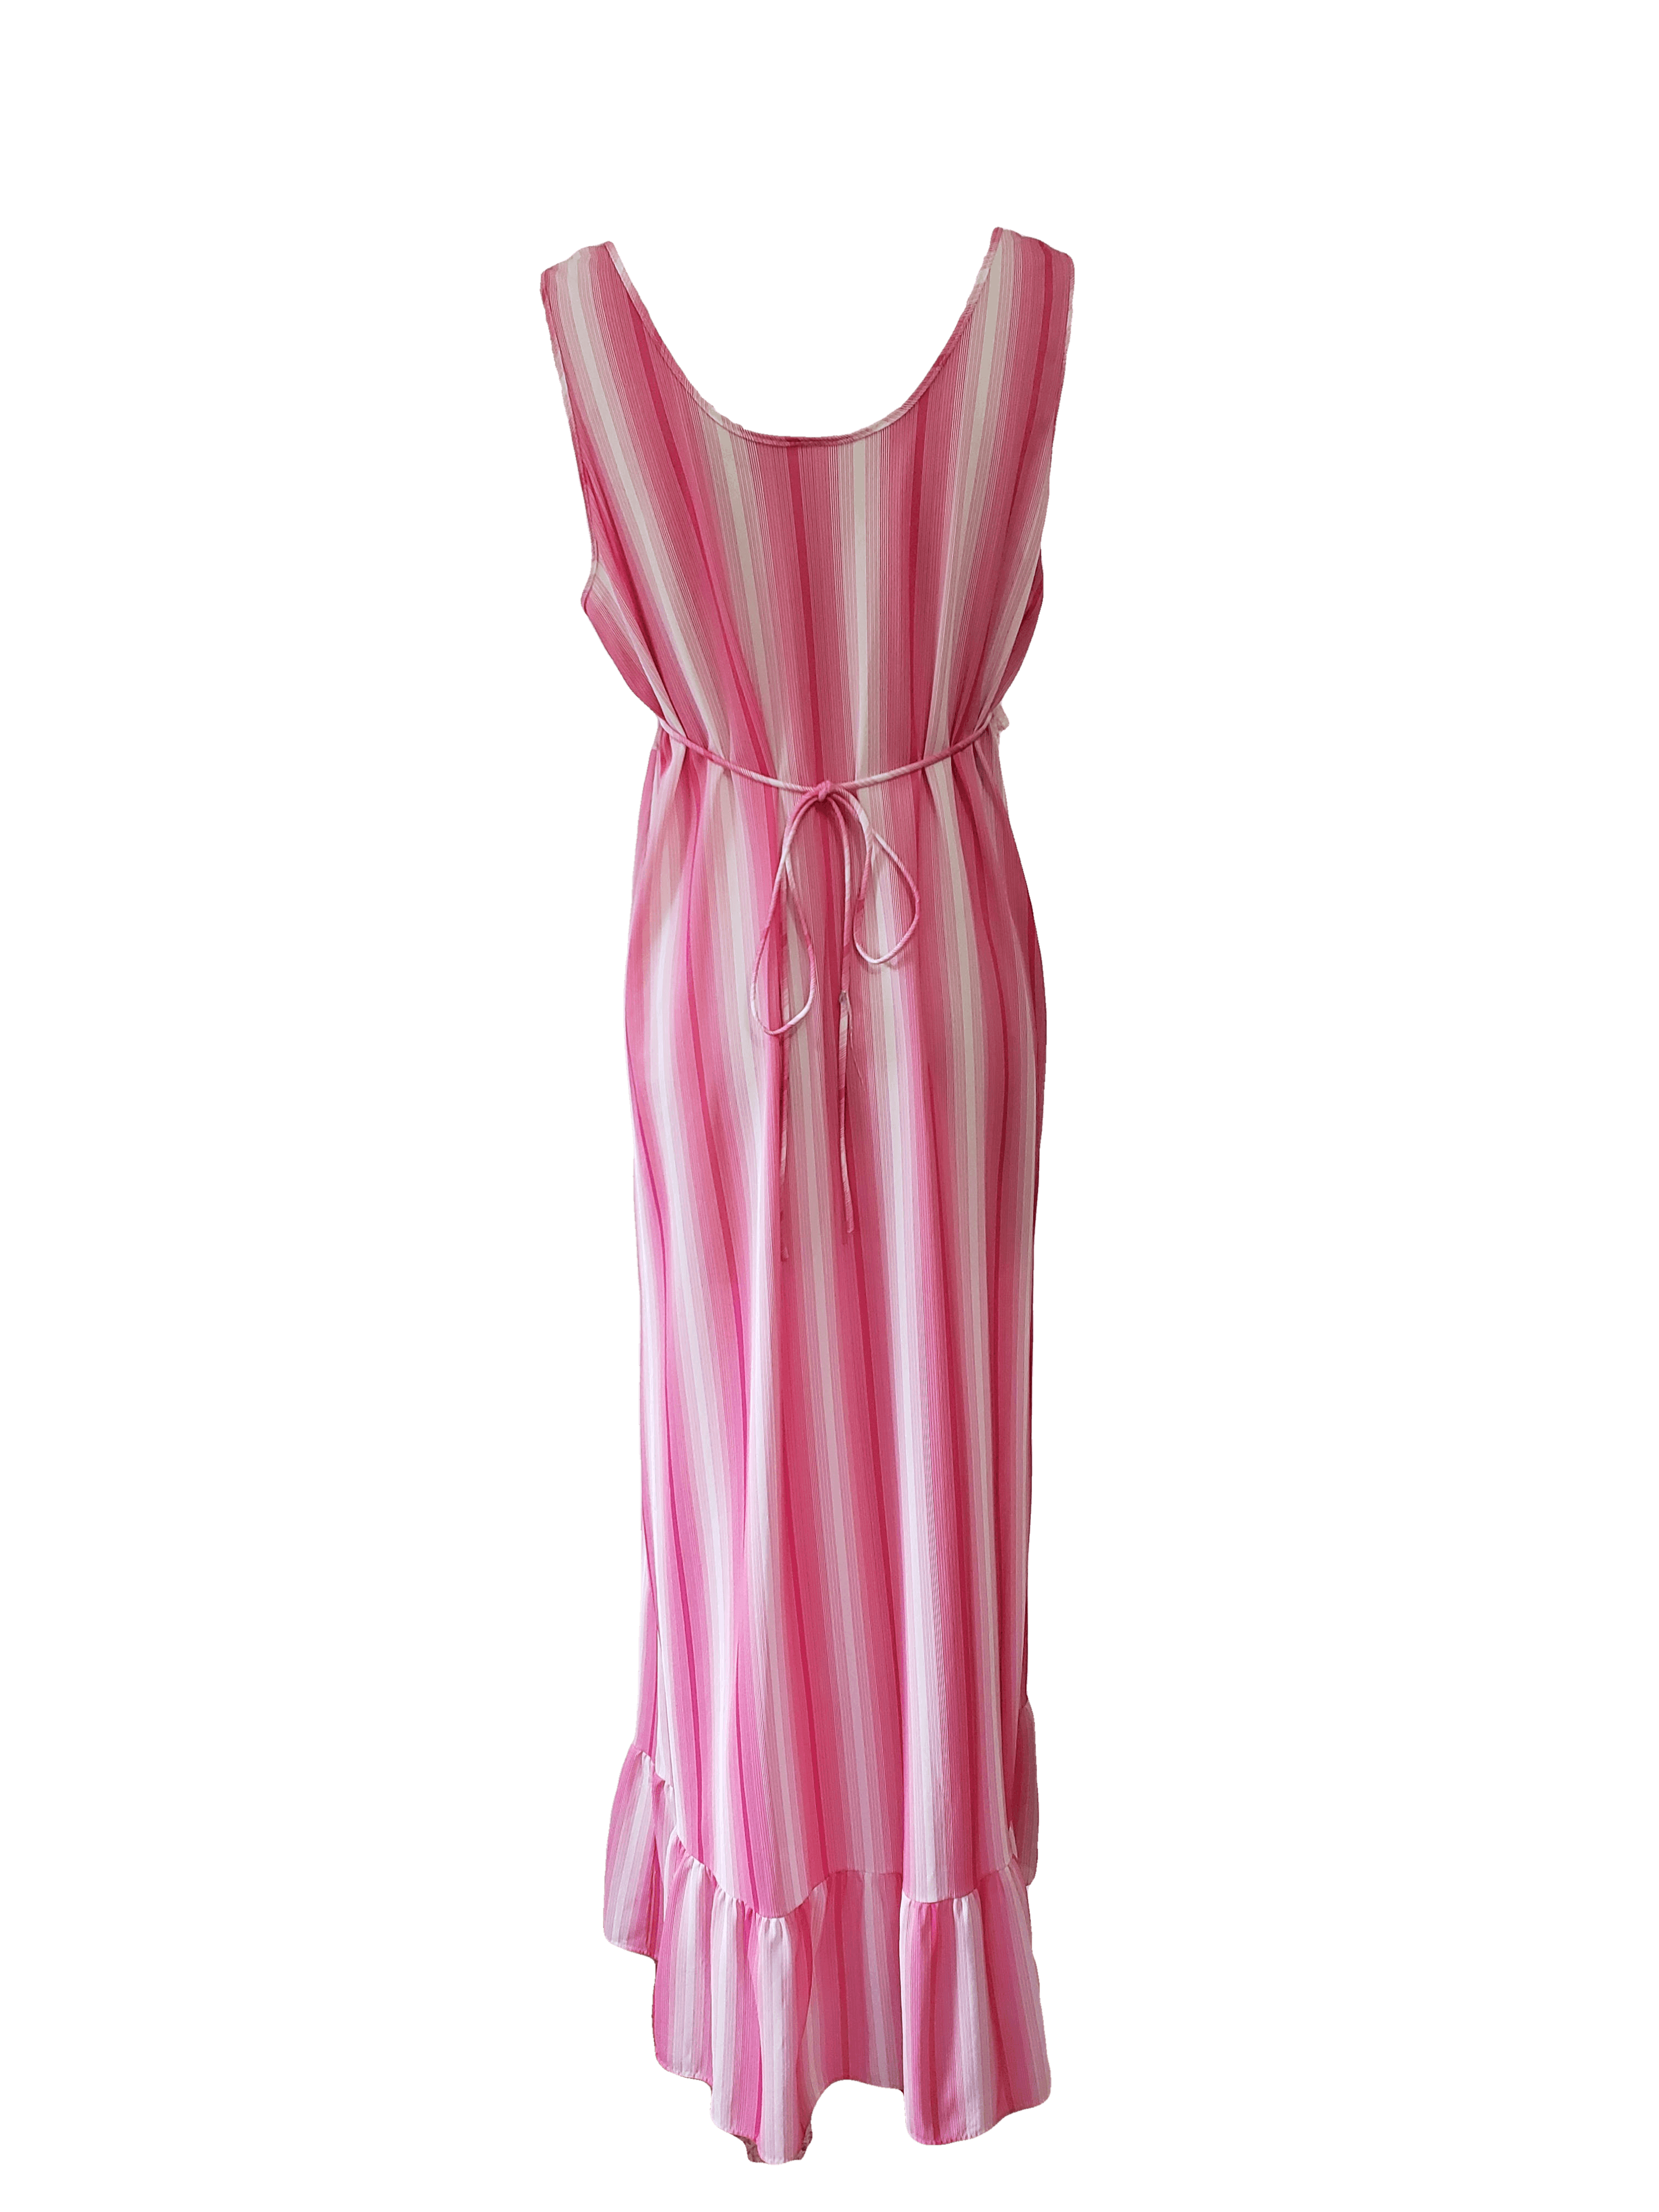 pink and white striped maxi dress